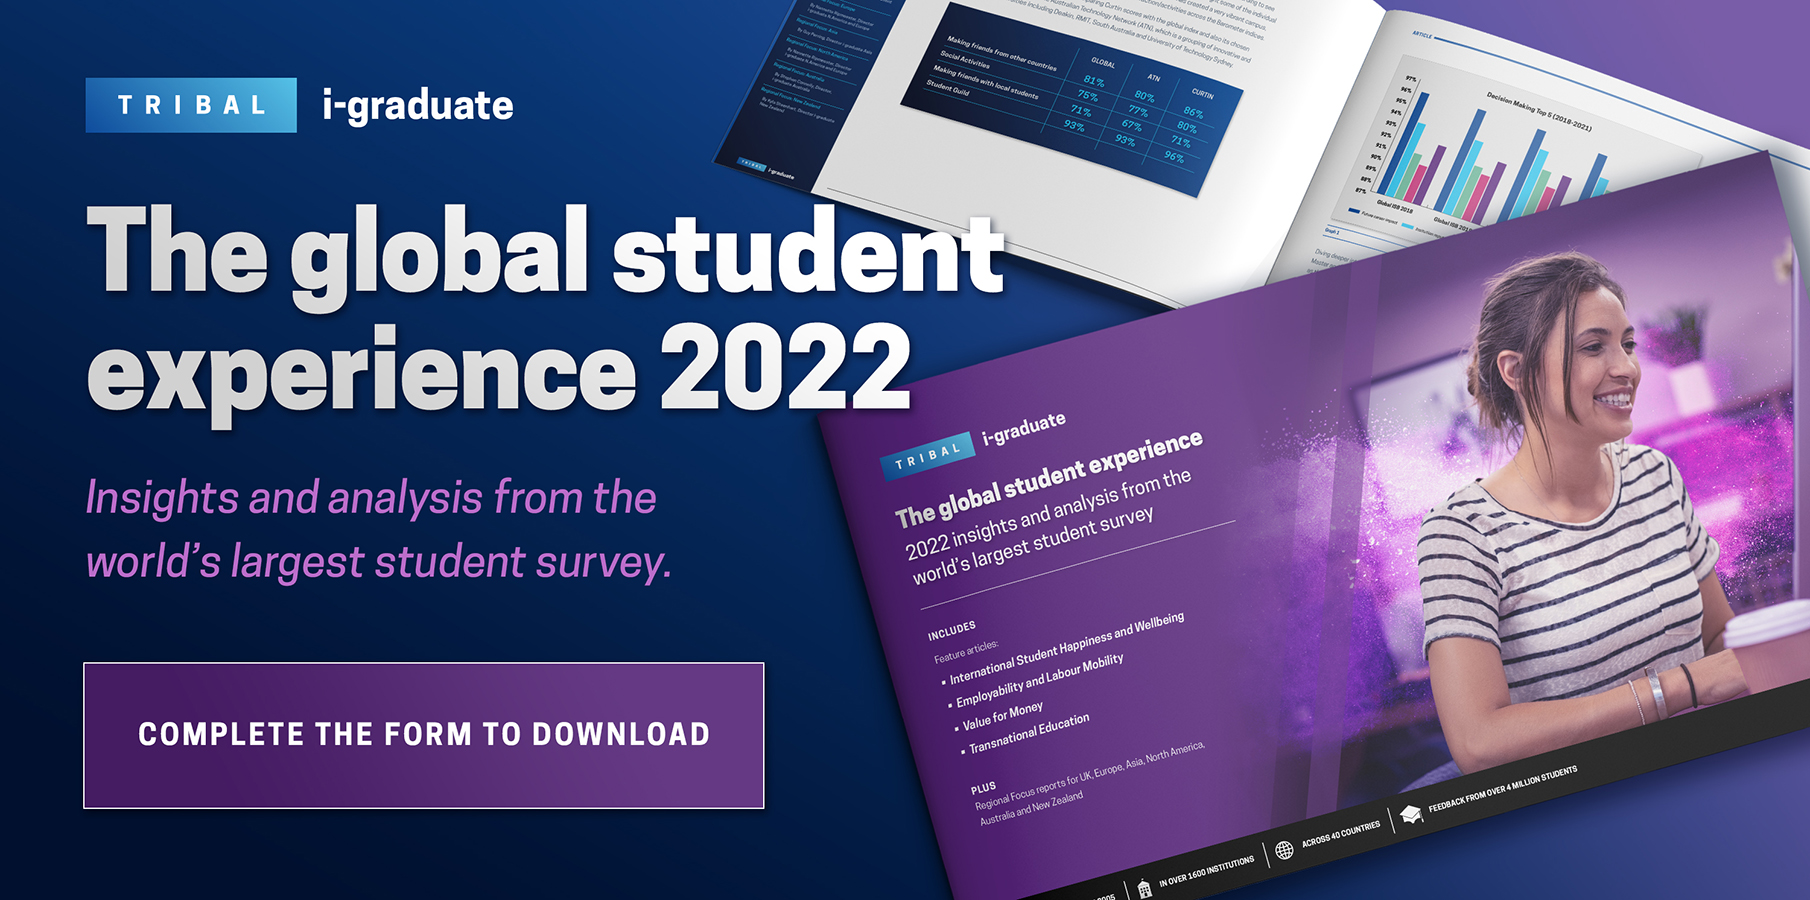 Global student experience report image